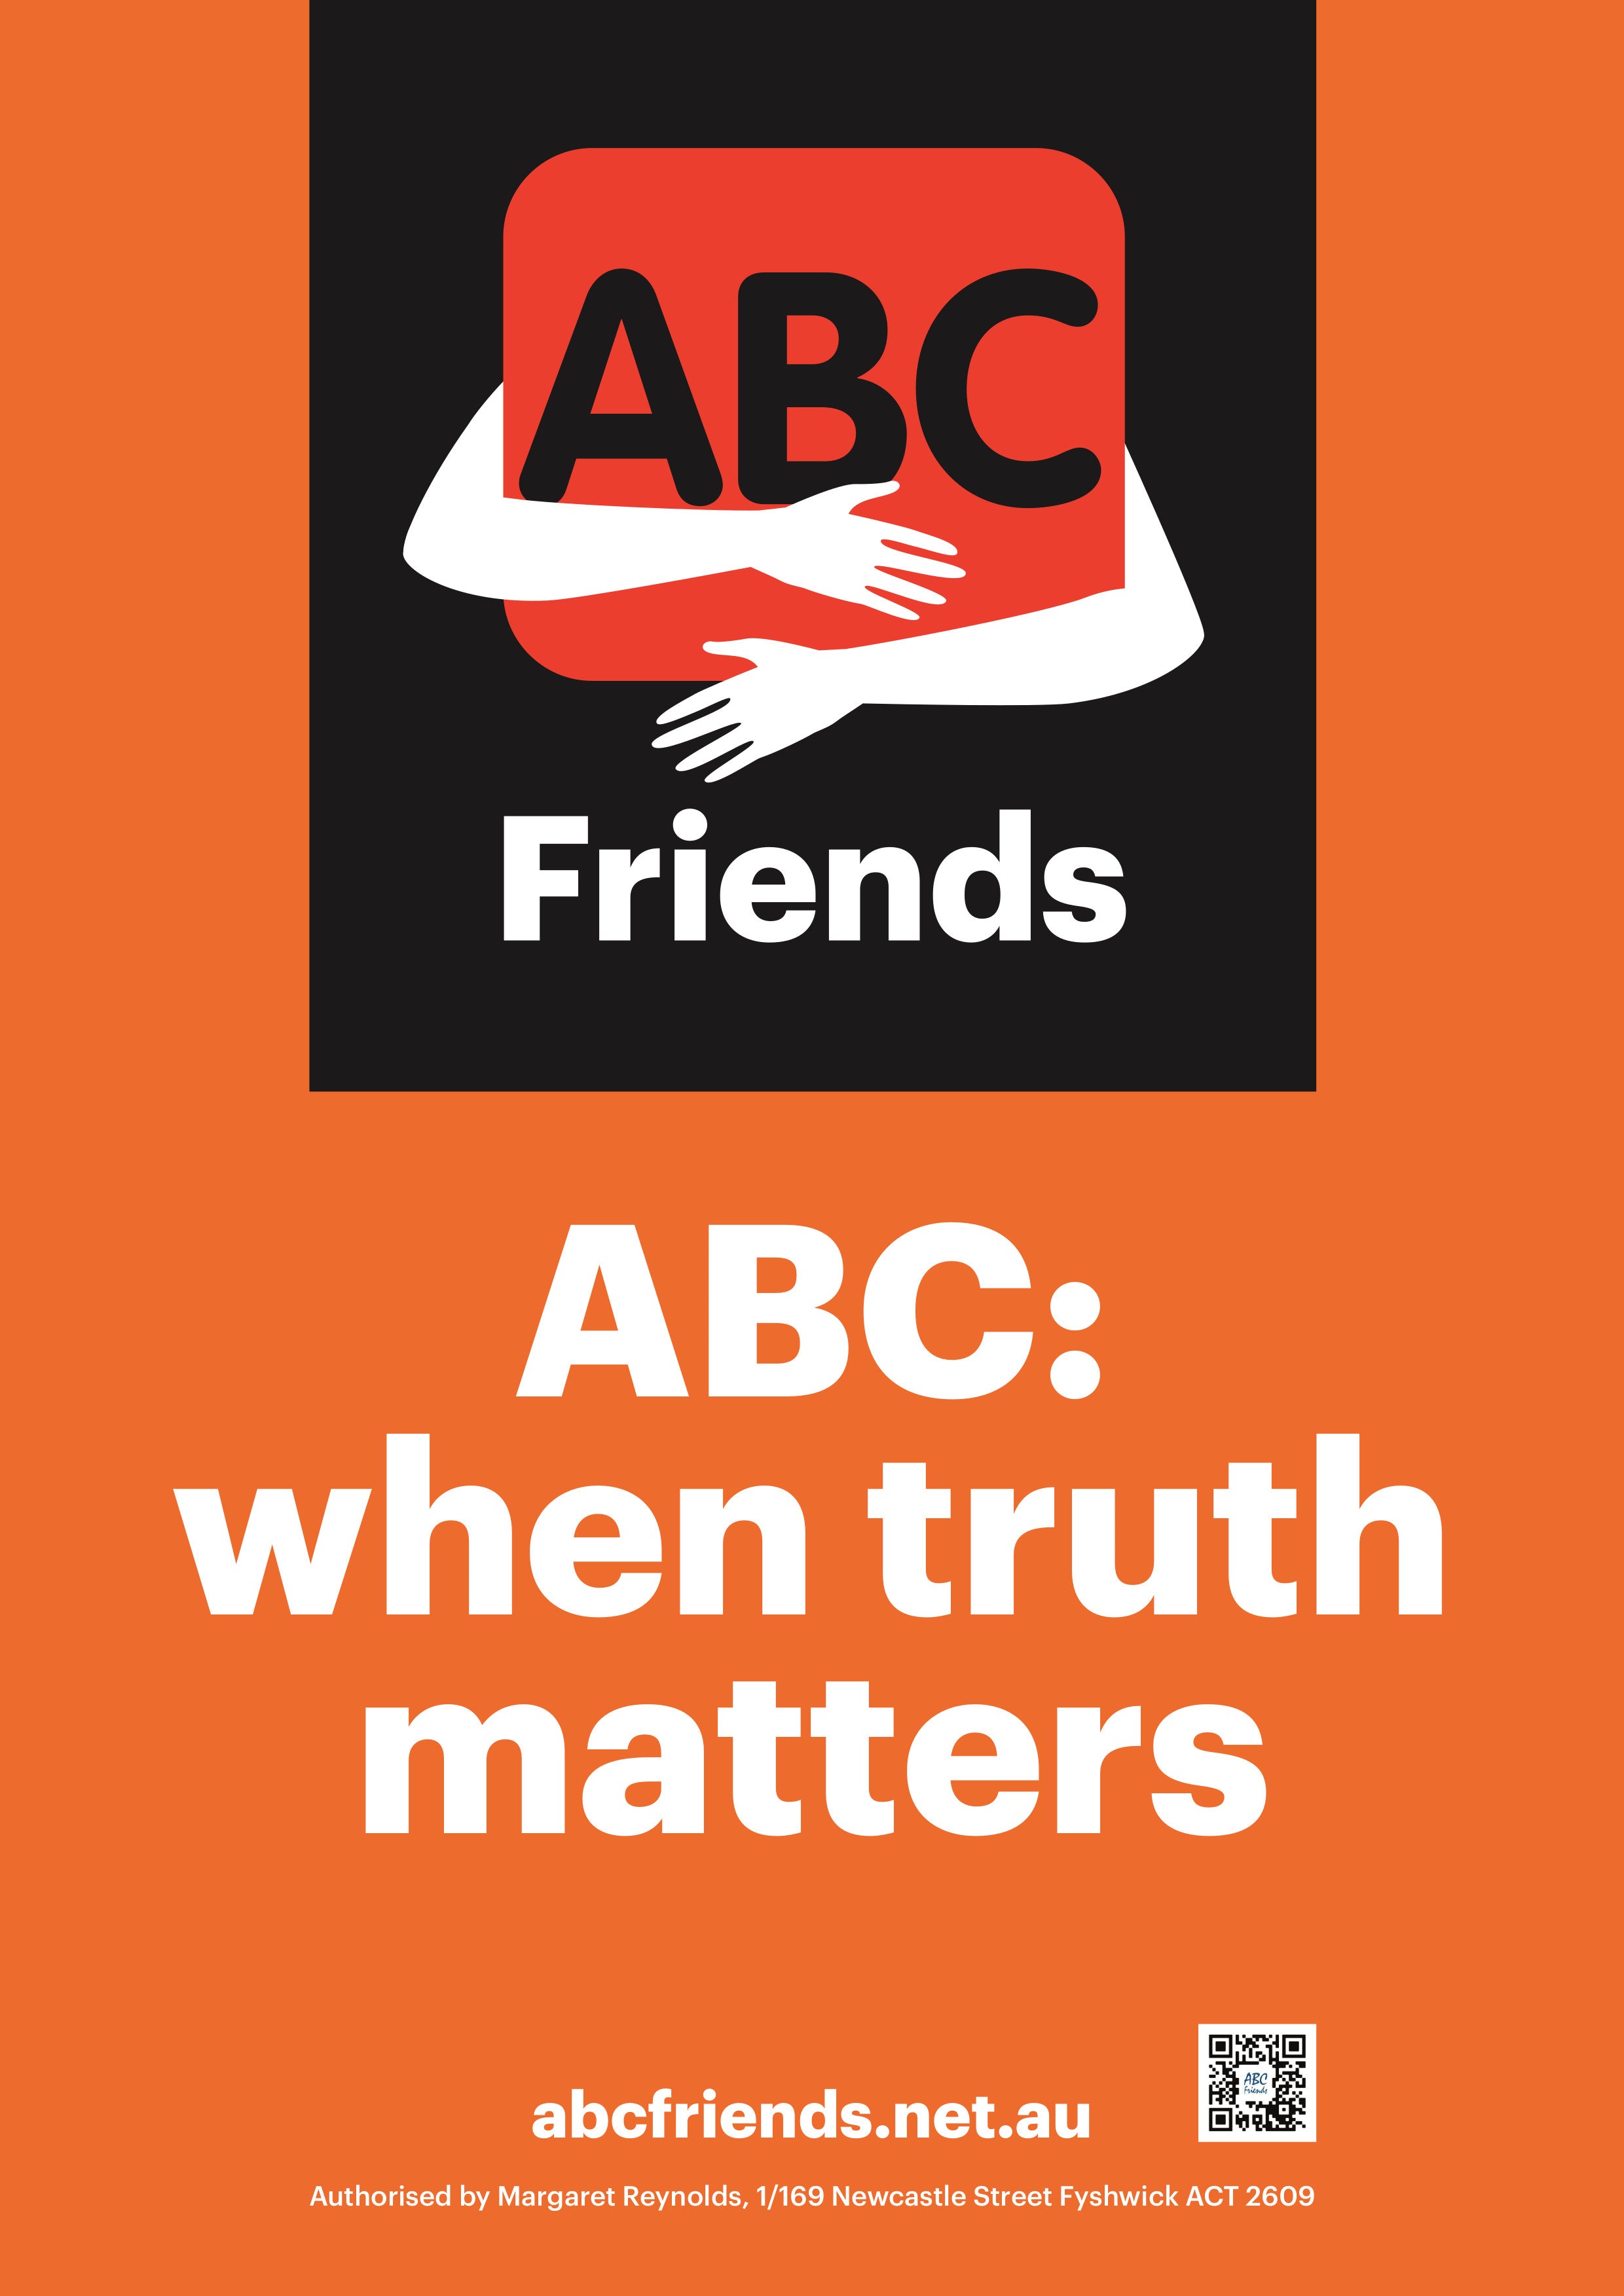 Poster: When truth matters